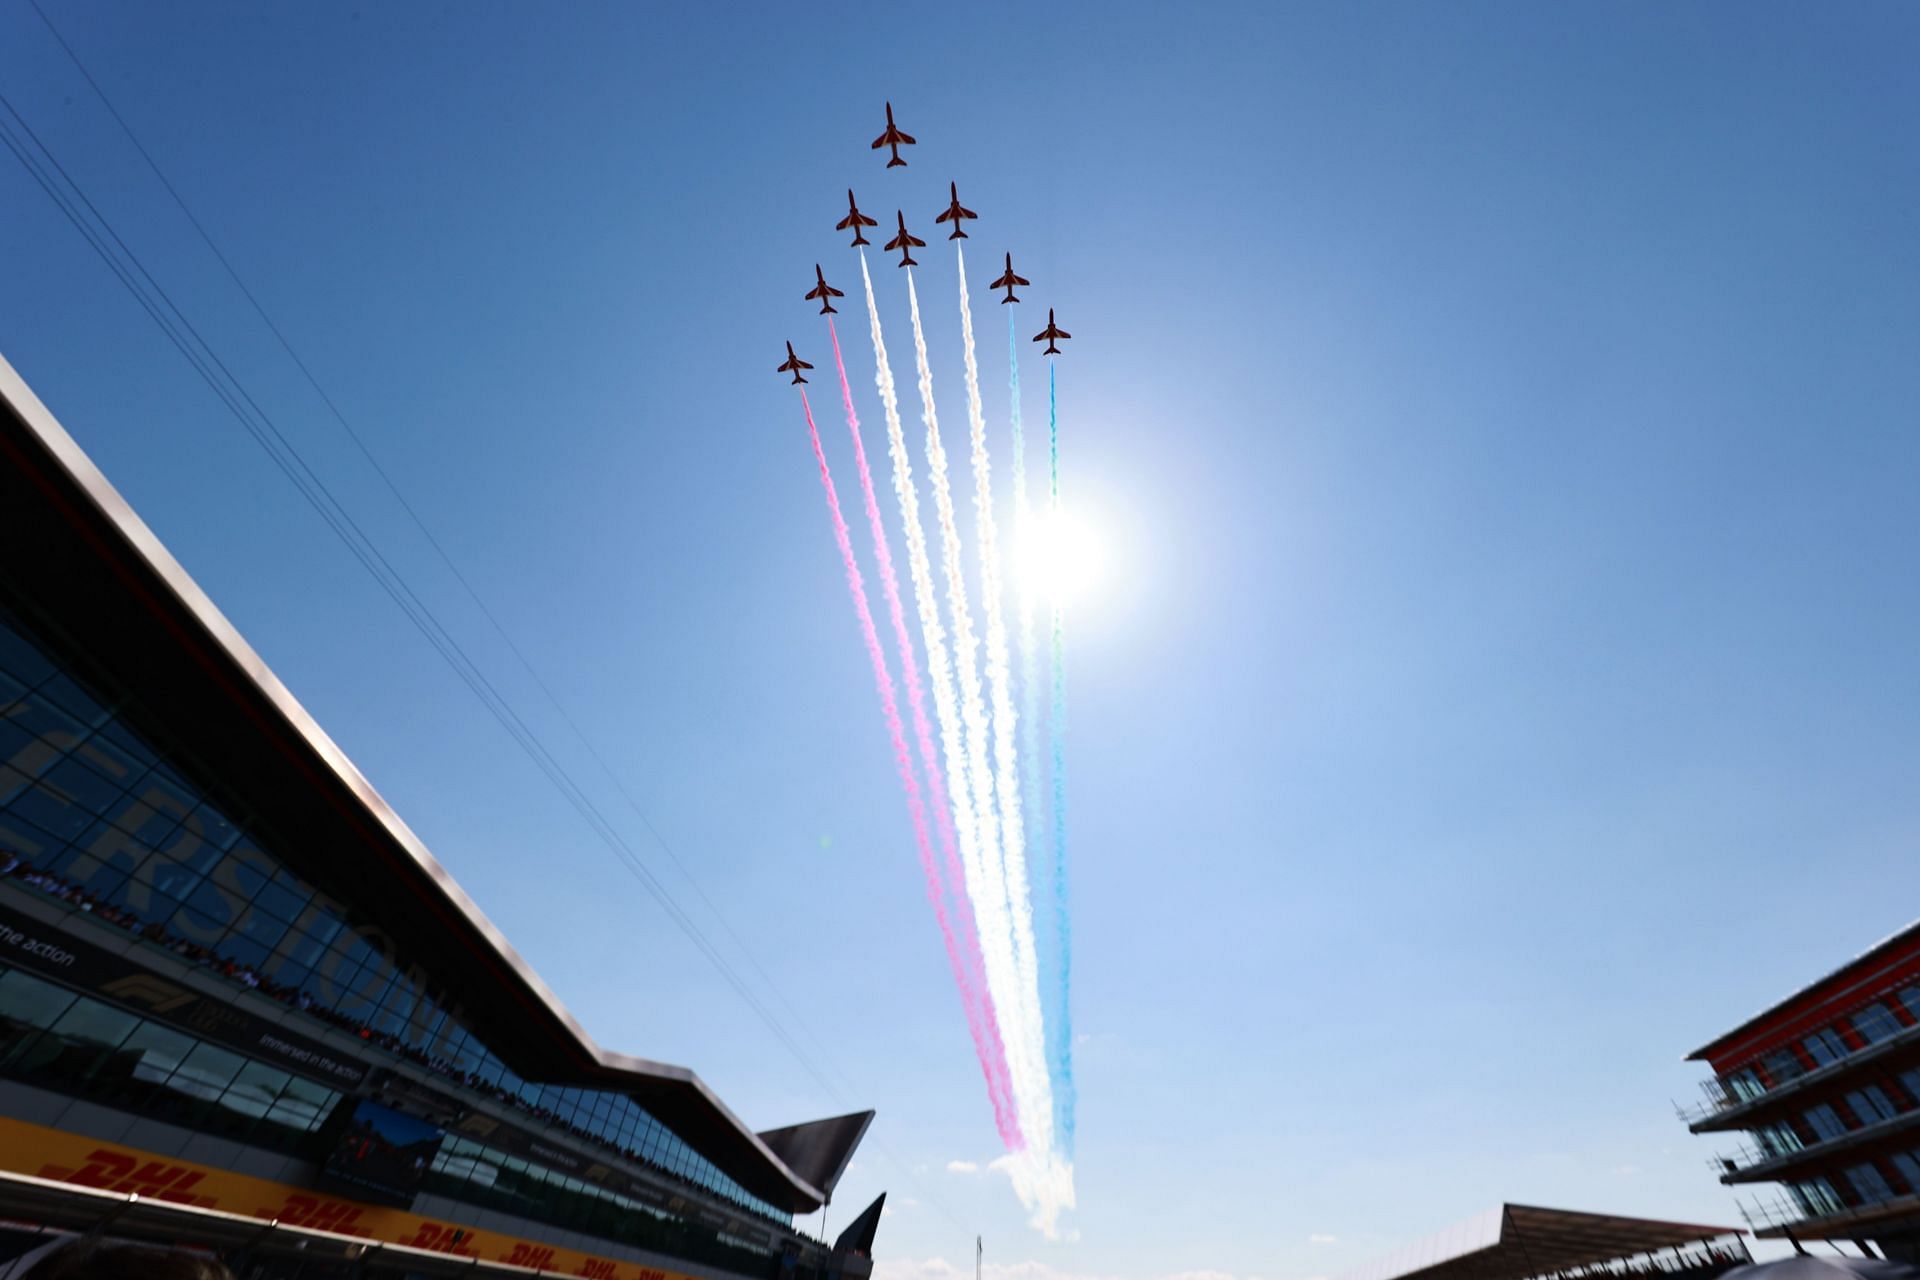 The Red Arrows perform at Silverstone ahead of the 2021 F1 British GP (Photo by Mark Thompson/Getty Images)